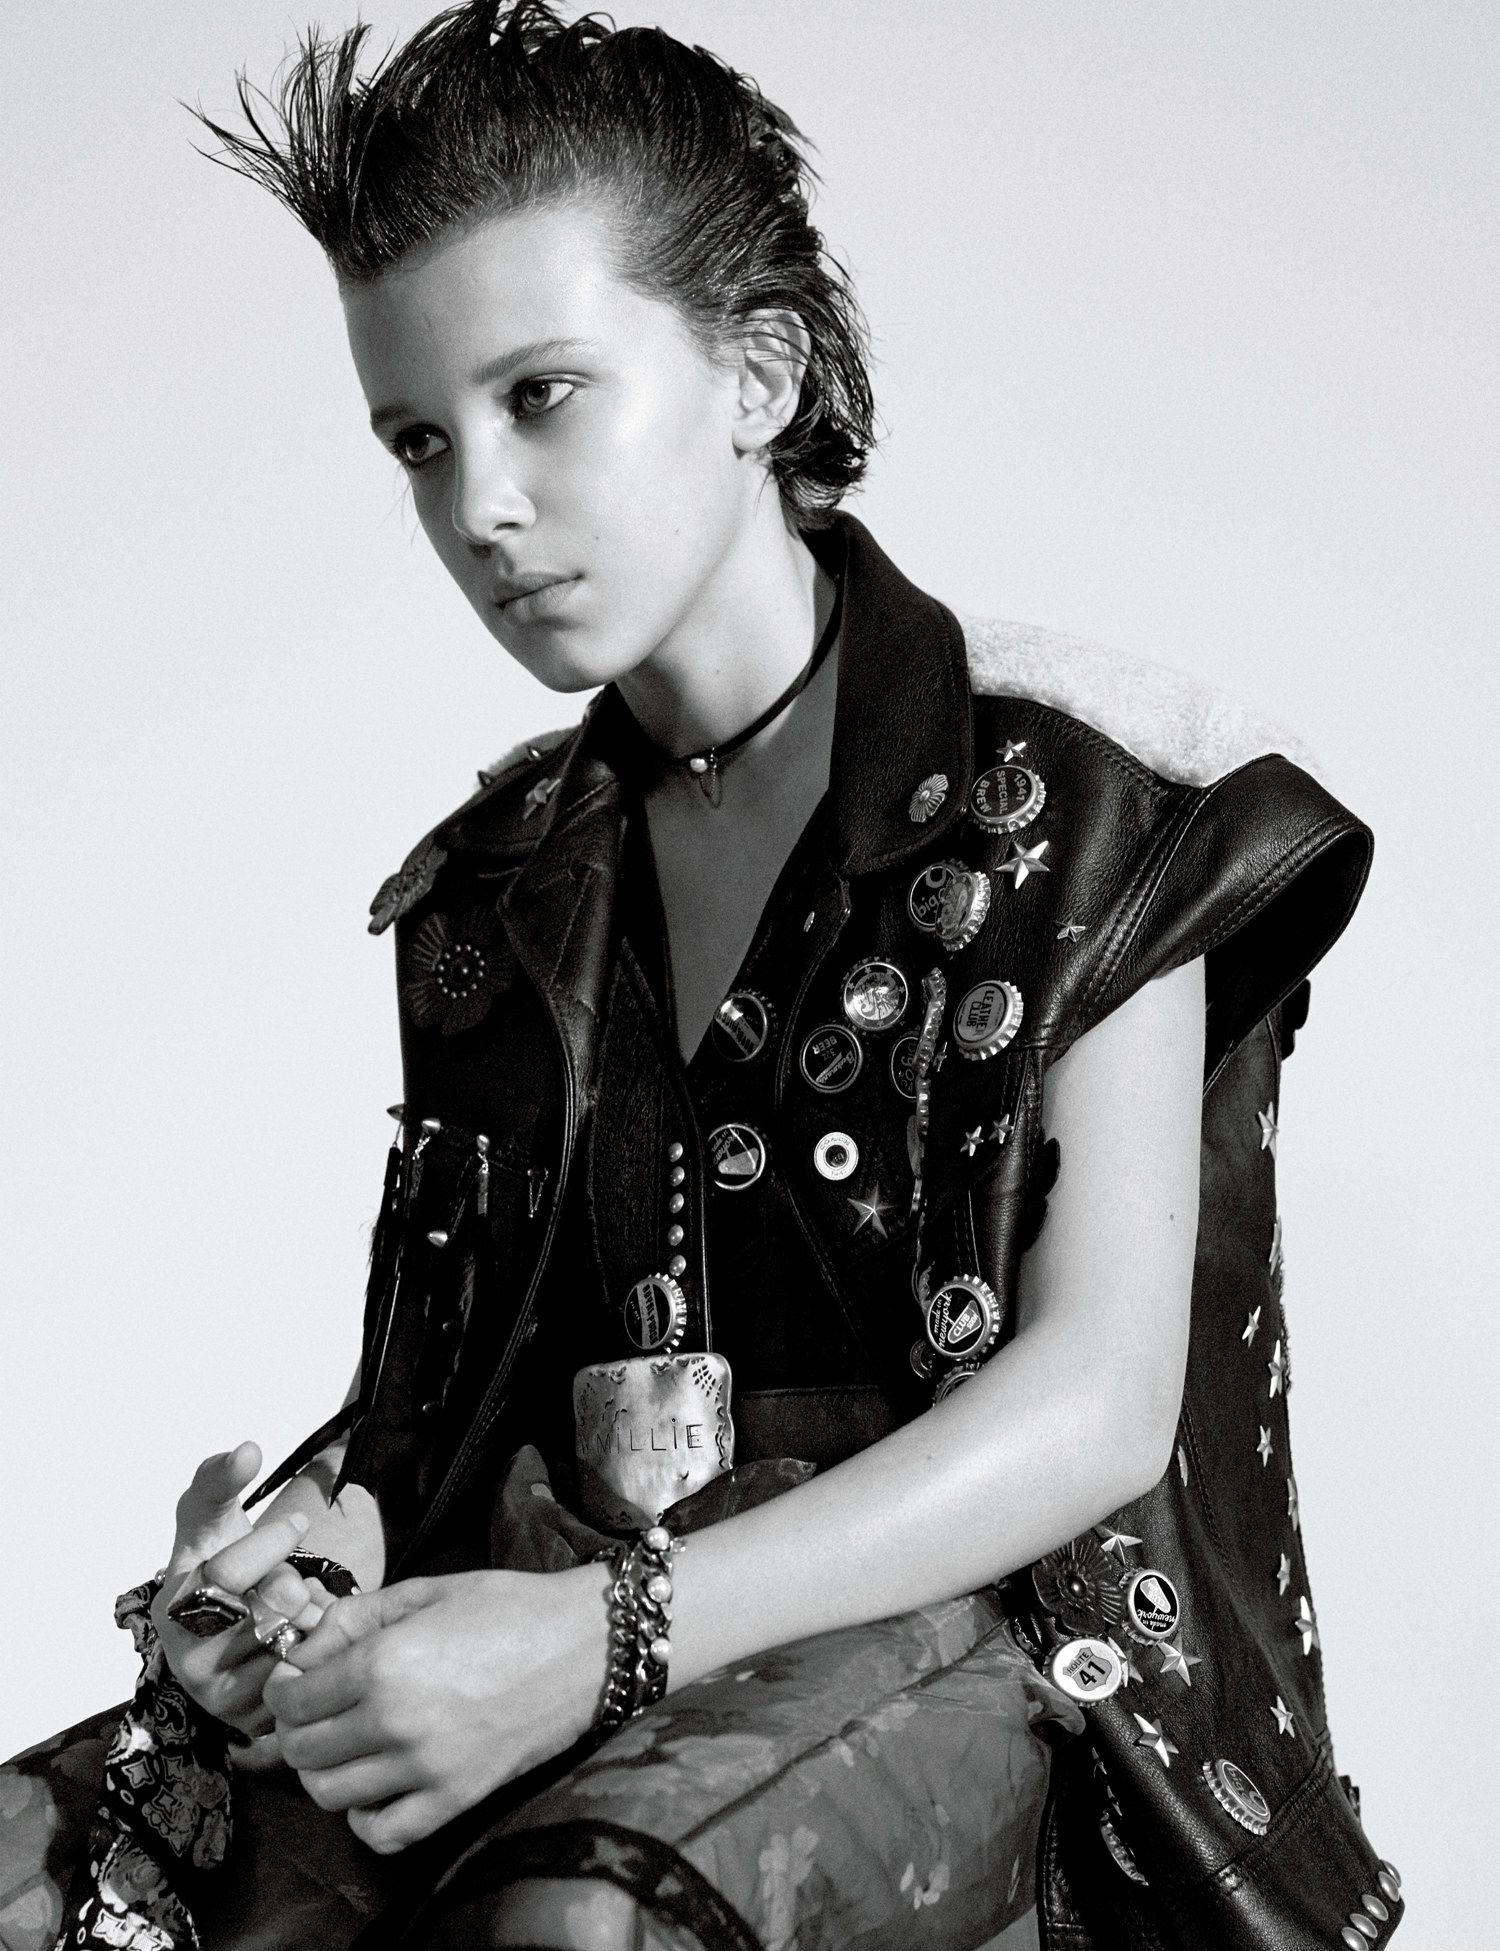 Millie Bobby Brown Manages To Be More Badass Than Eleven In This